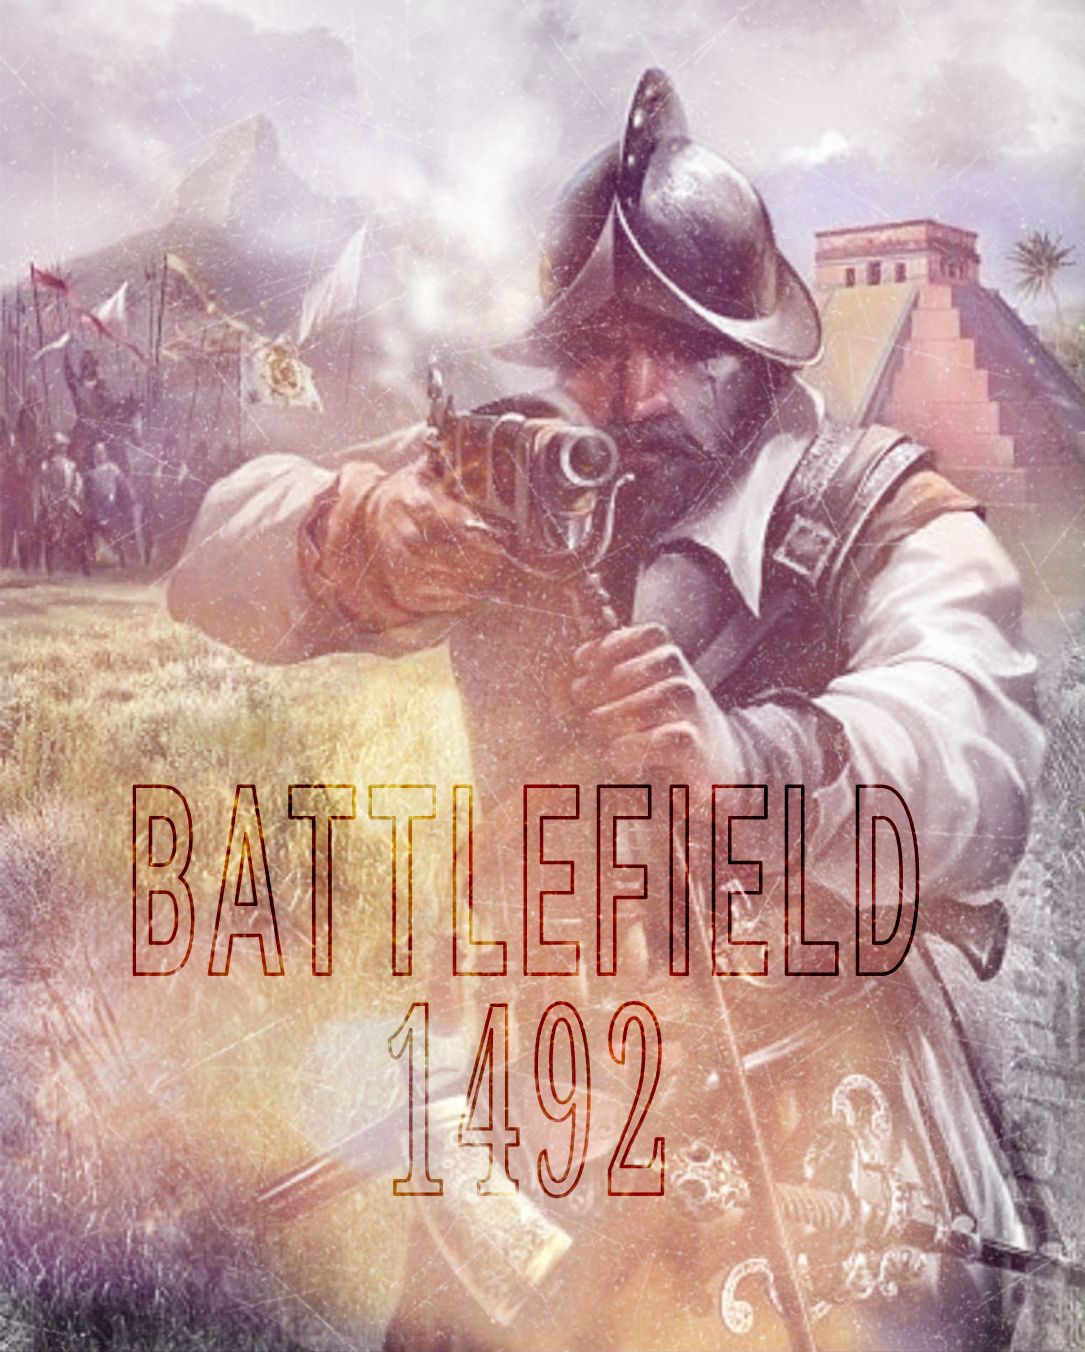 EA should make BATTLEFIELD 1492 in honor of Columbus day??